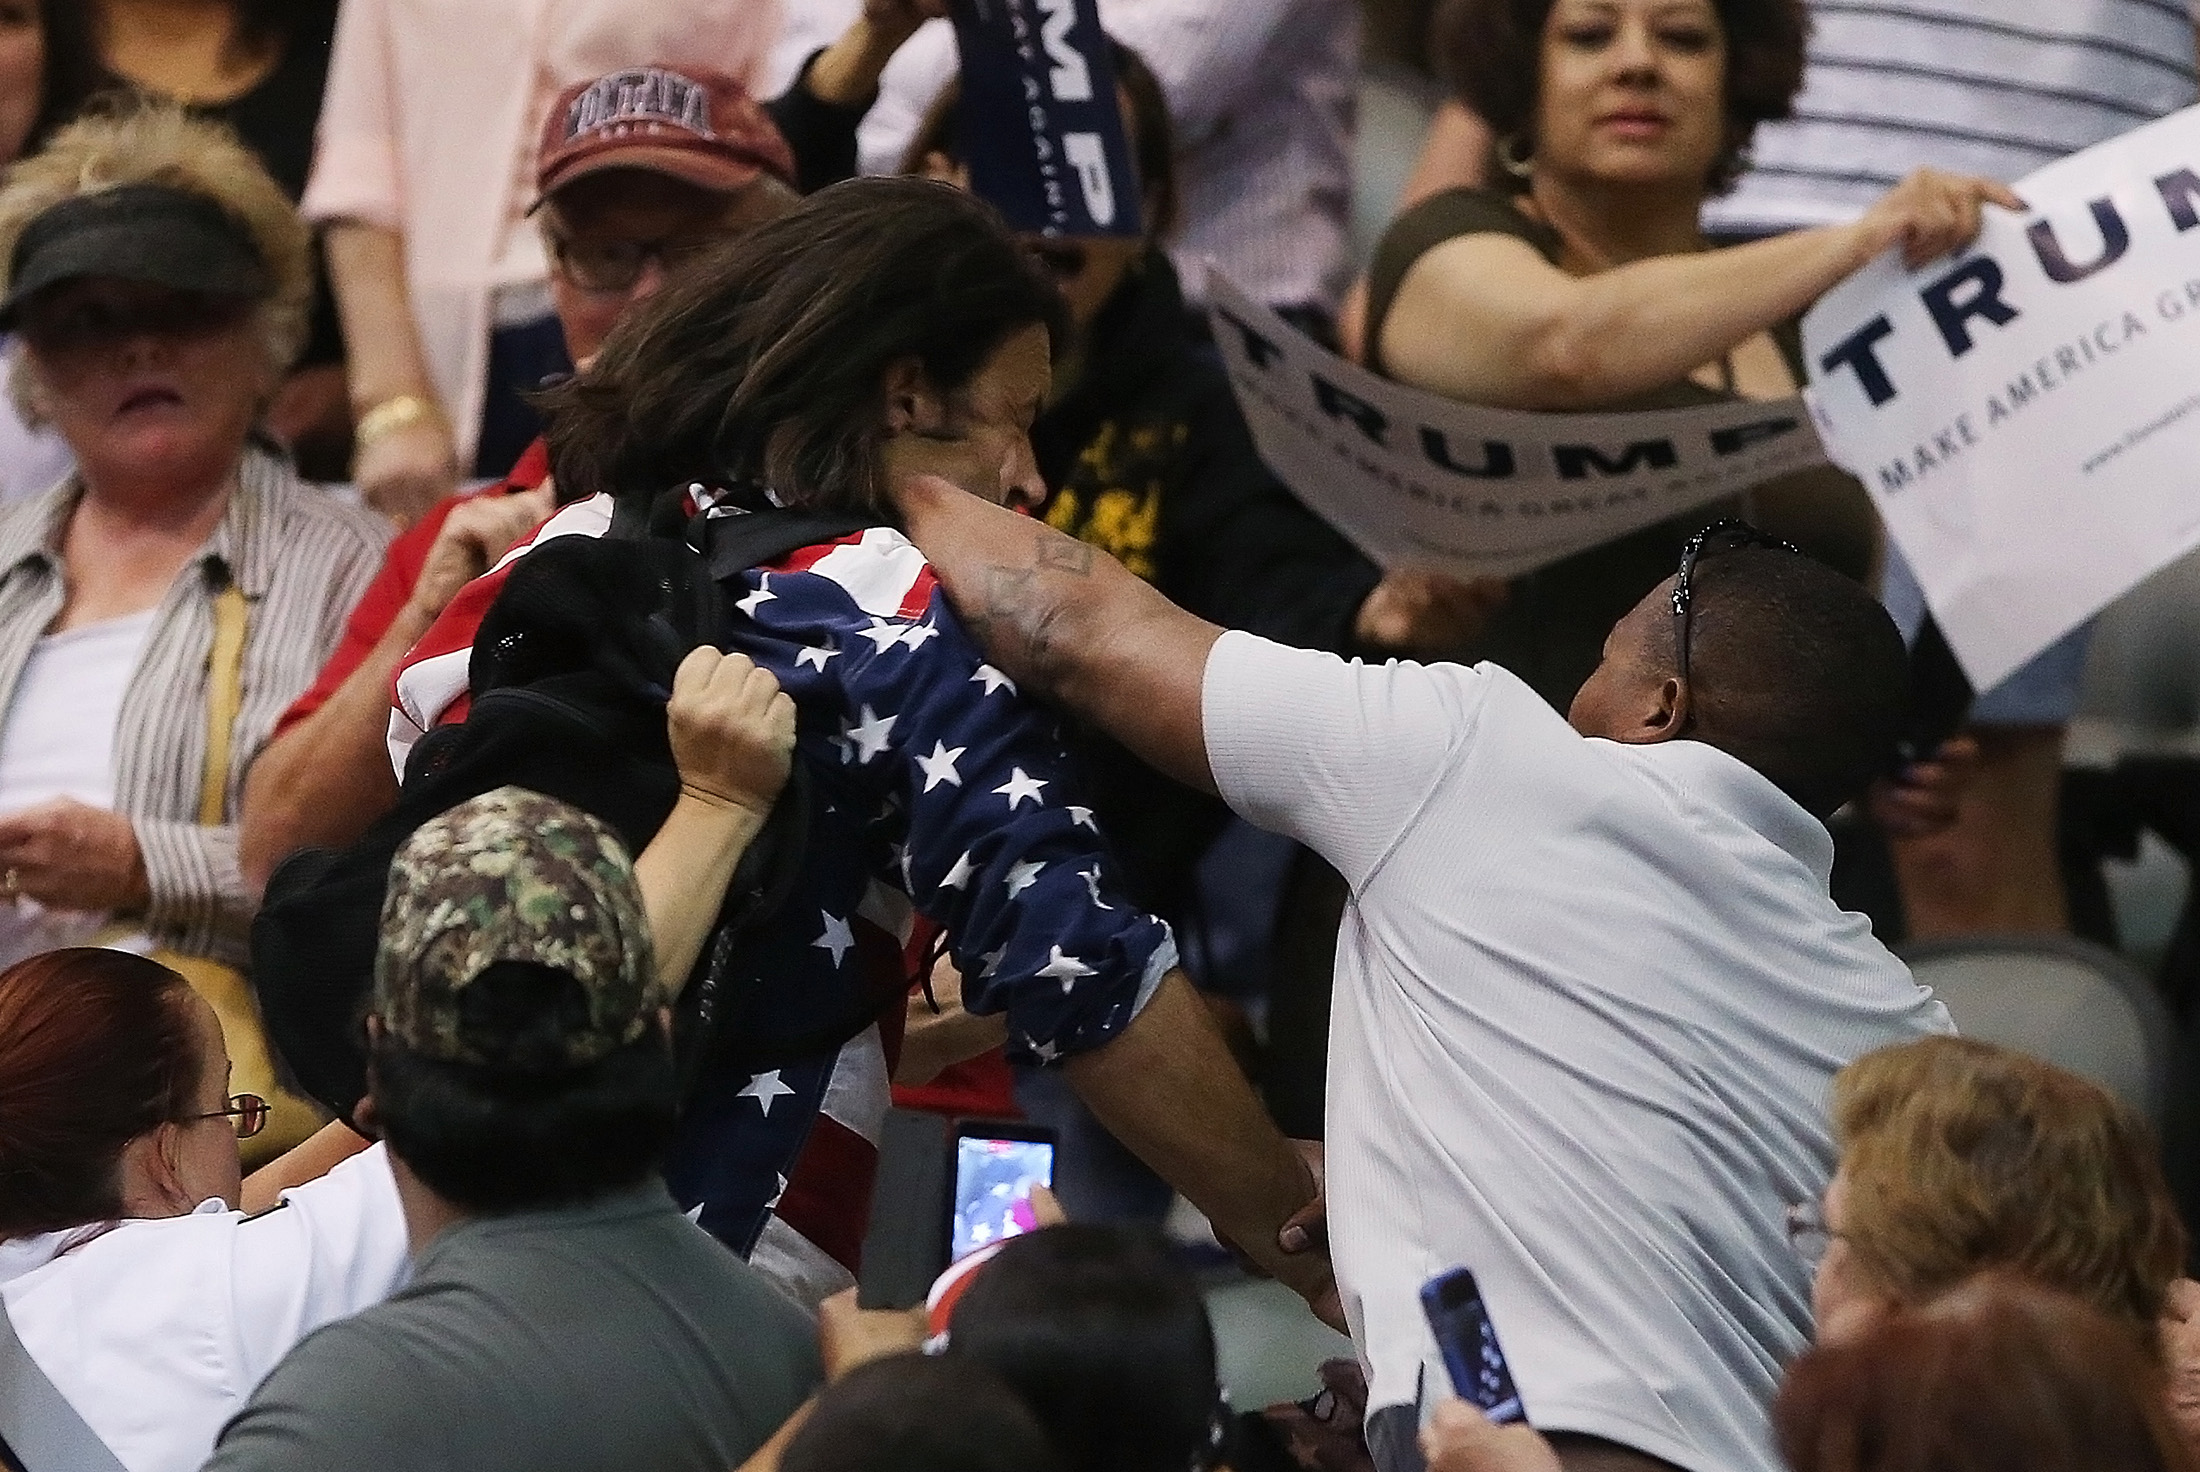 Trump protester Bryan Sanders, center left, is punched by a Trump supporter as he is escorted out of Republican presidential candidate Donald Trump's rally at the Tucson Arena in downtown Tucson, Ariz., Saturday, March 19, 2016. (Mike Christy/Arizona Daily Star via AP)
